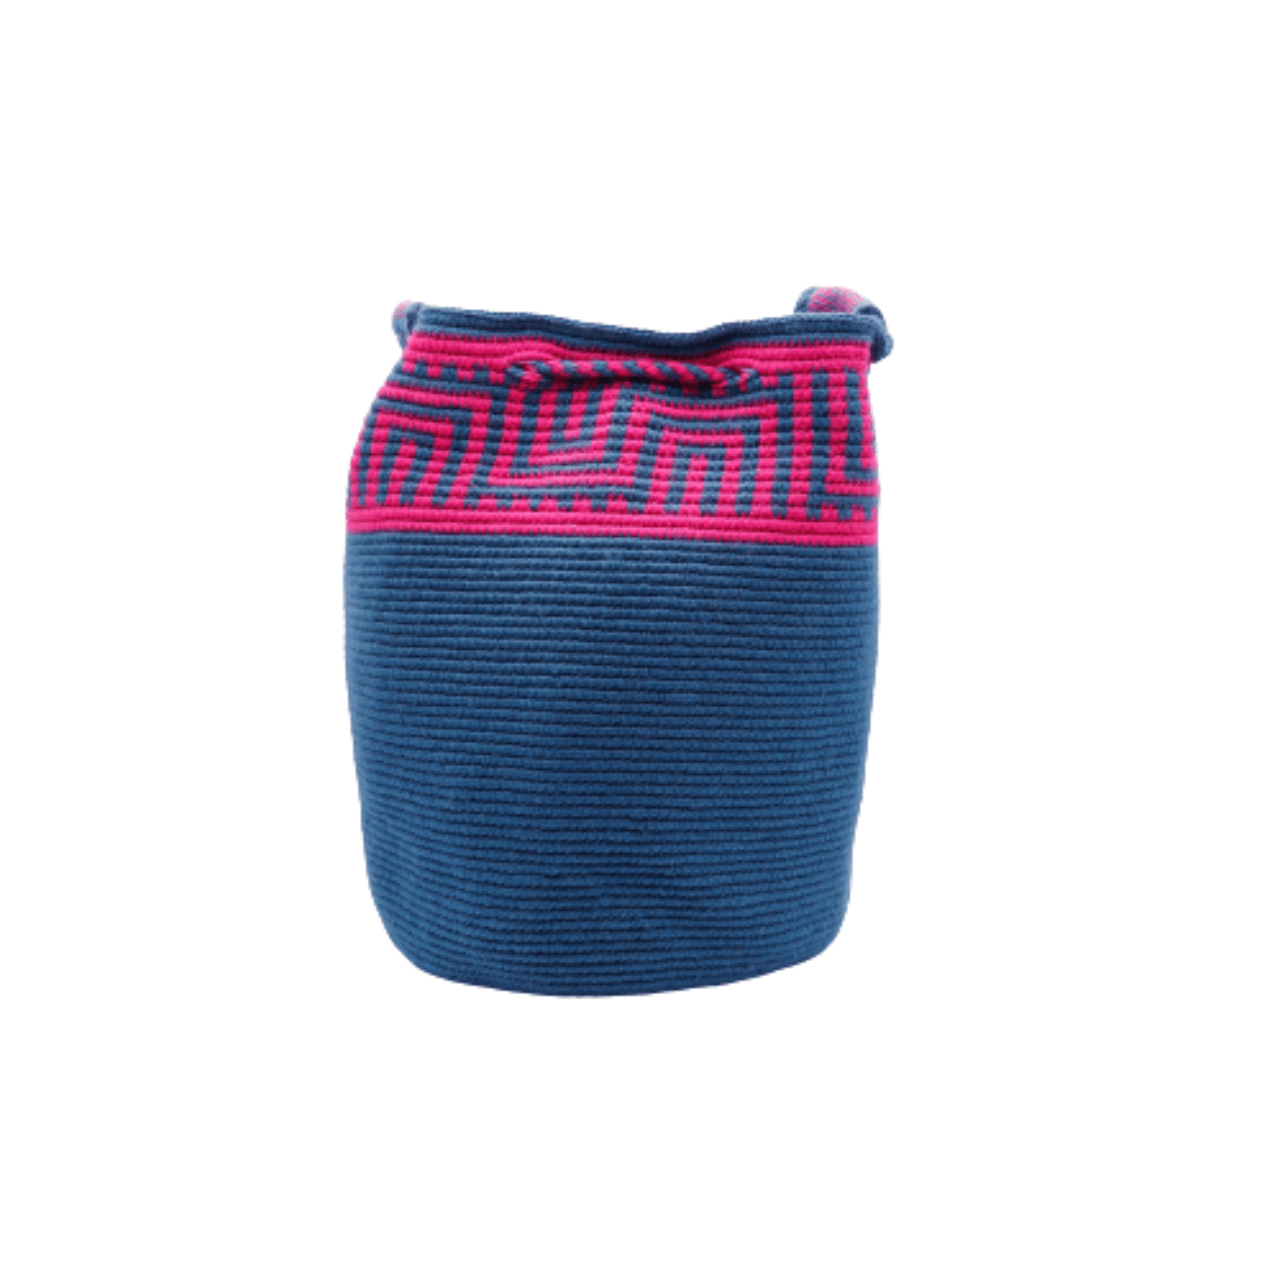 Pao Wayuu bag in solid cobalt blue with captivating magenta design on top, creating a beautiful and uniquely crafted accessory.